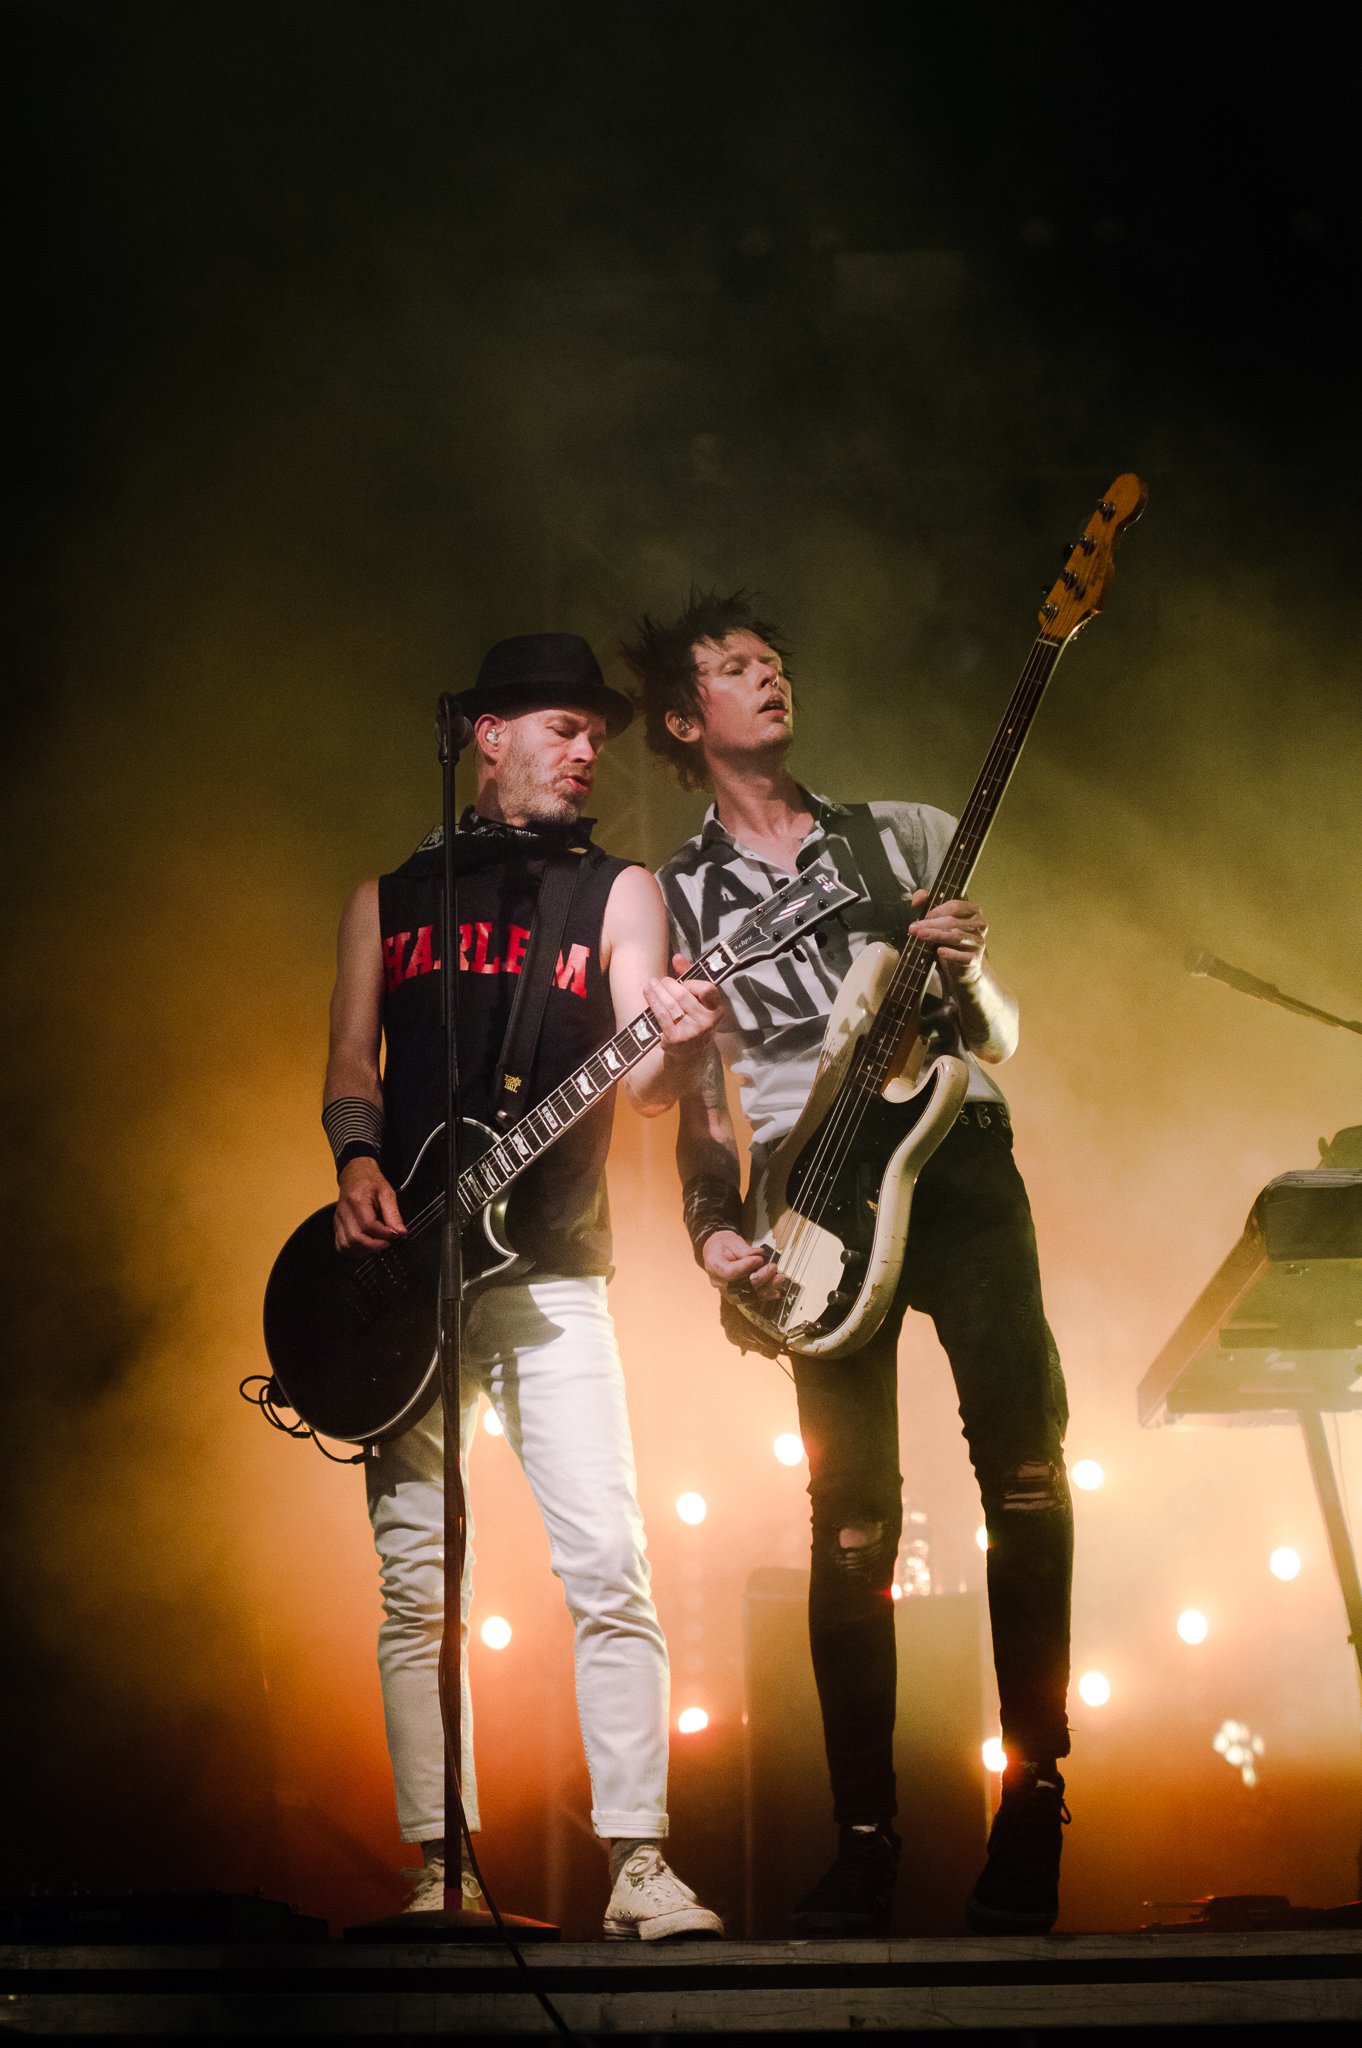  Jason McCaslin and rhythm guitarist Tom Thacker of Sum 41 and  share the same energy as they play “Motiviation.” 